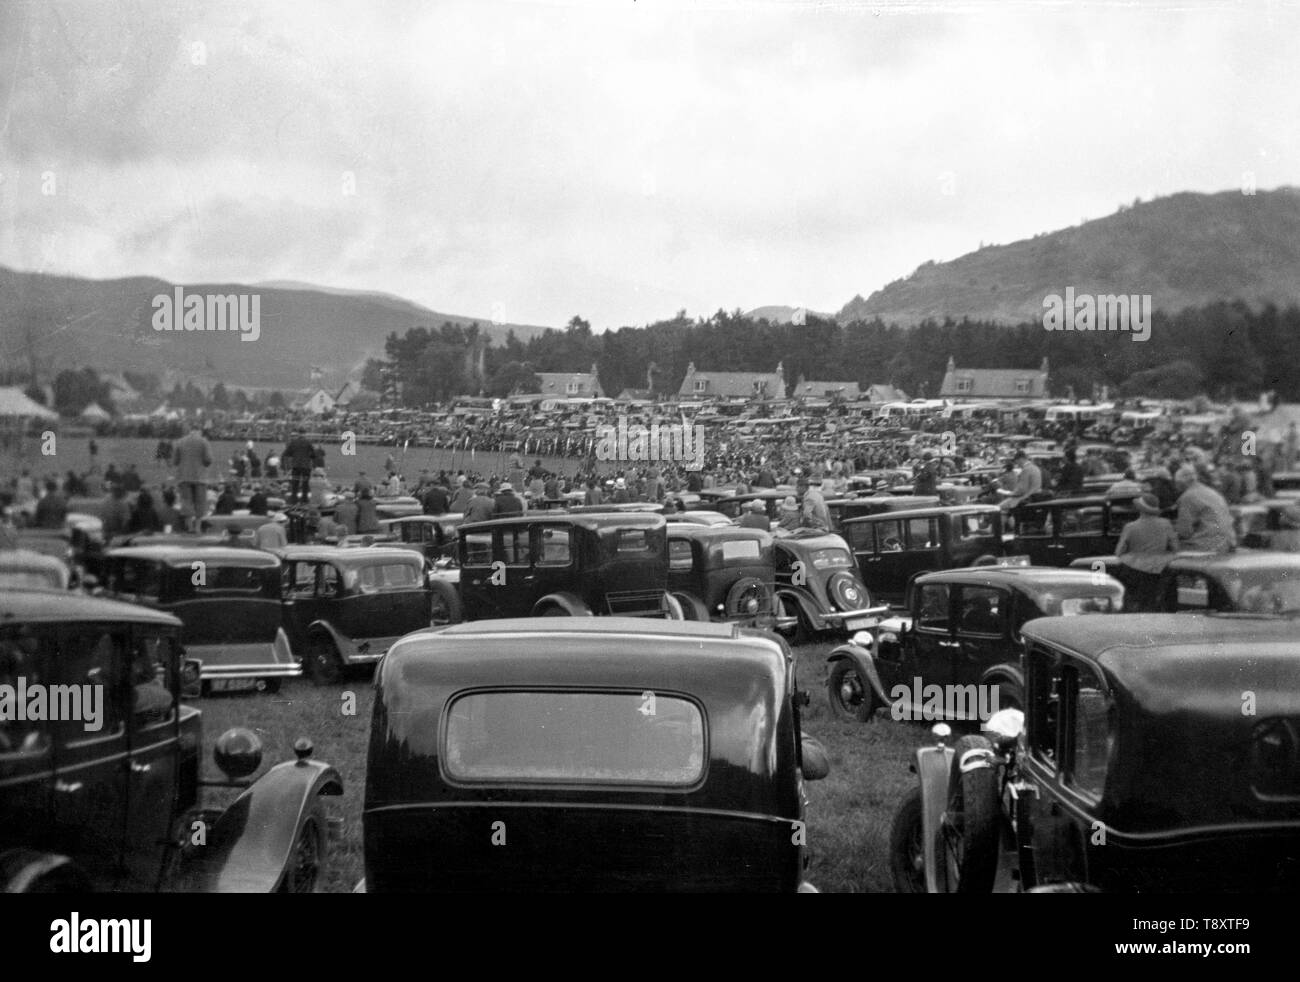 Cars Parked at a Highland Games in Scotland c1937 Stock Photo